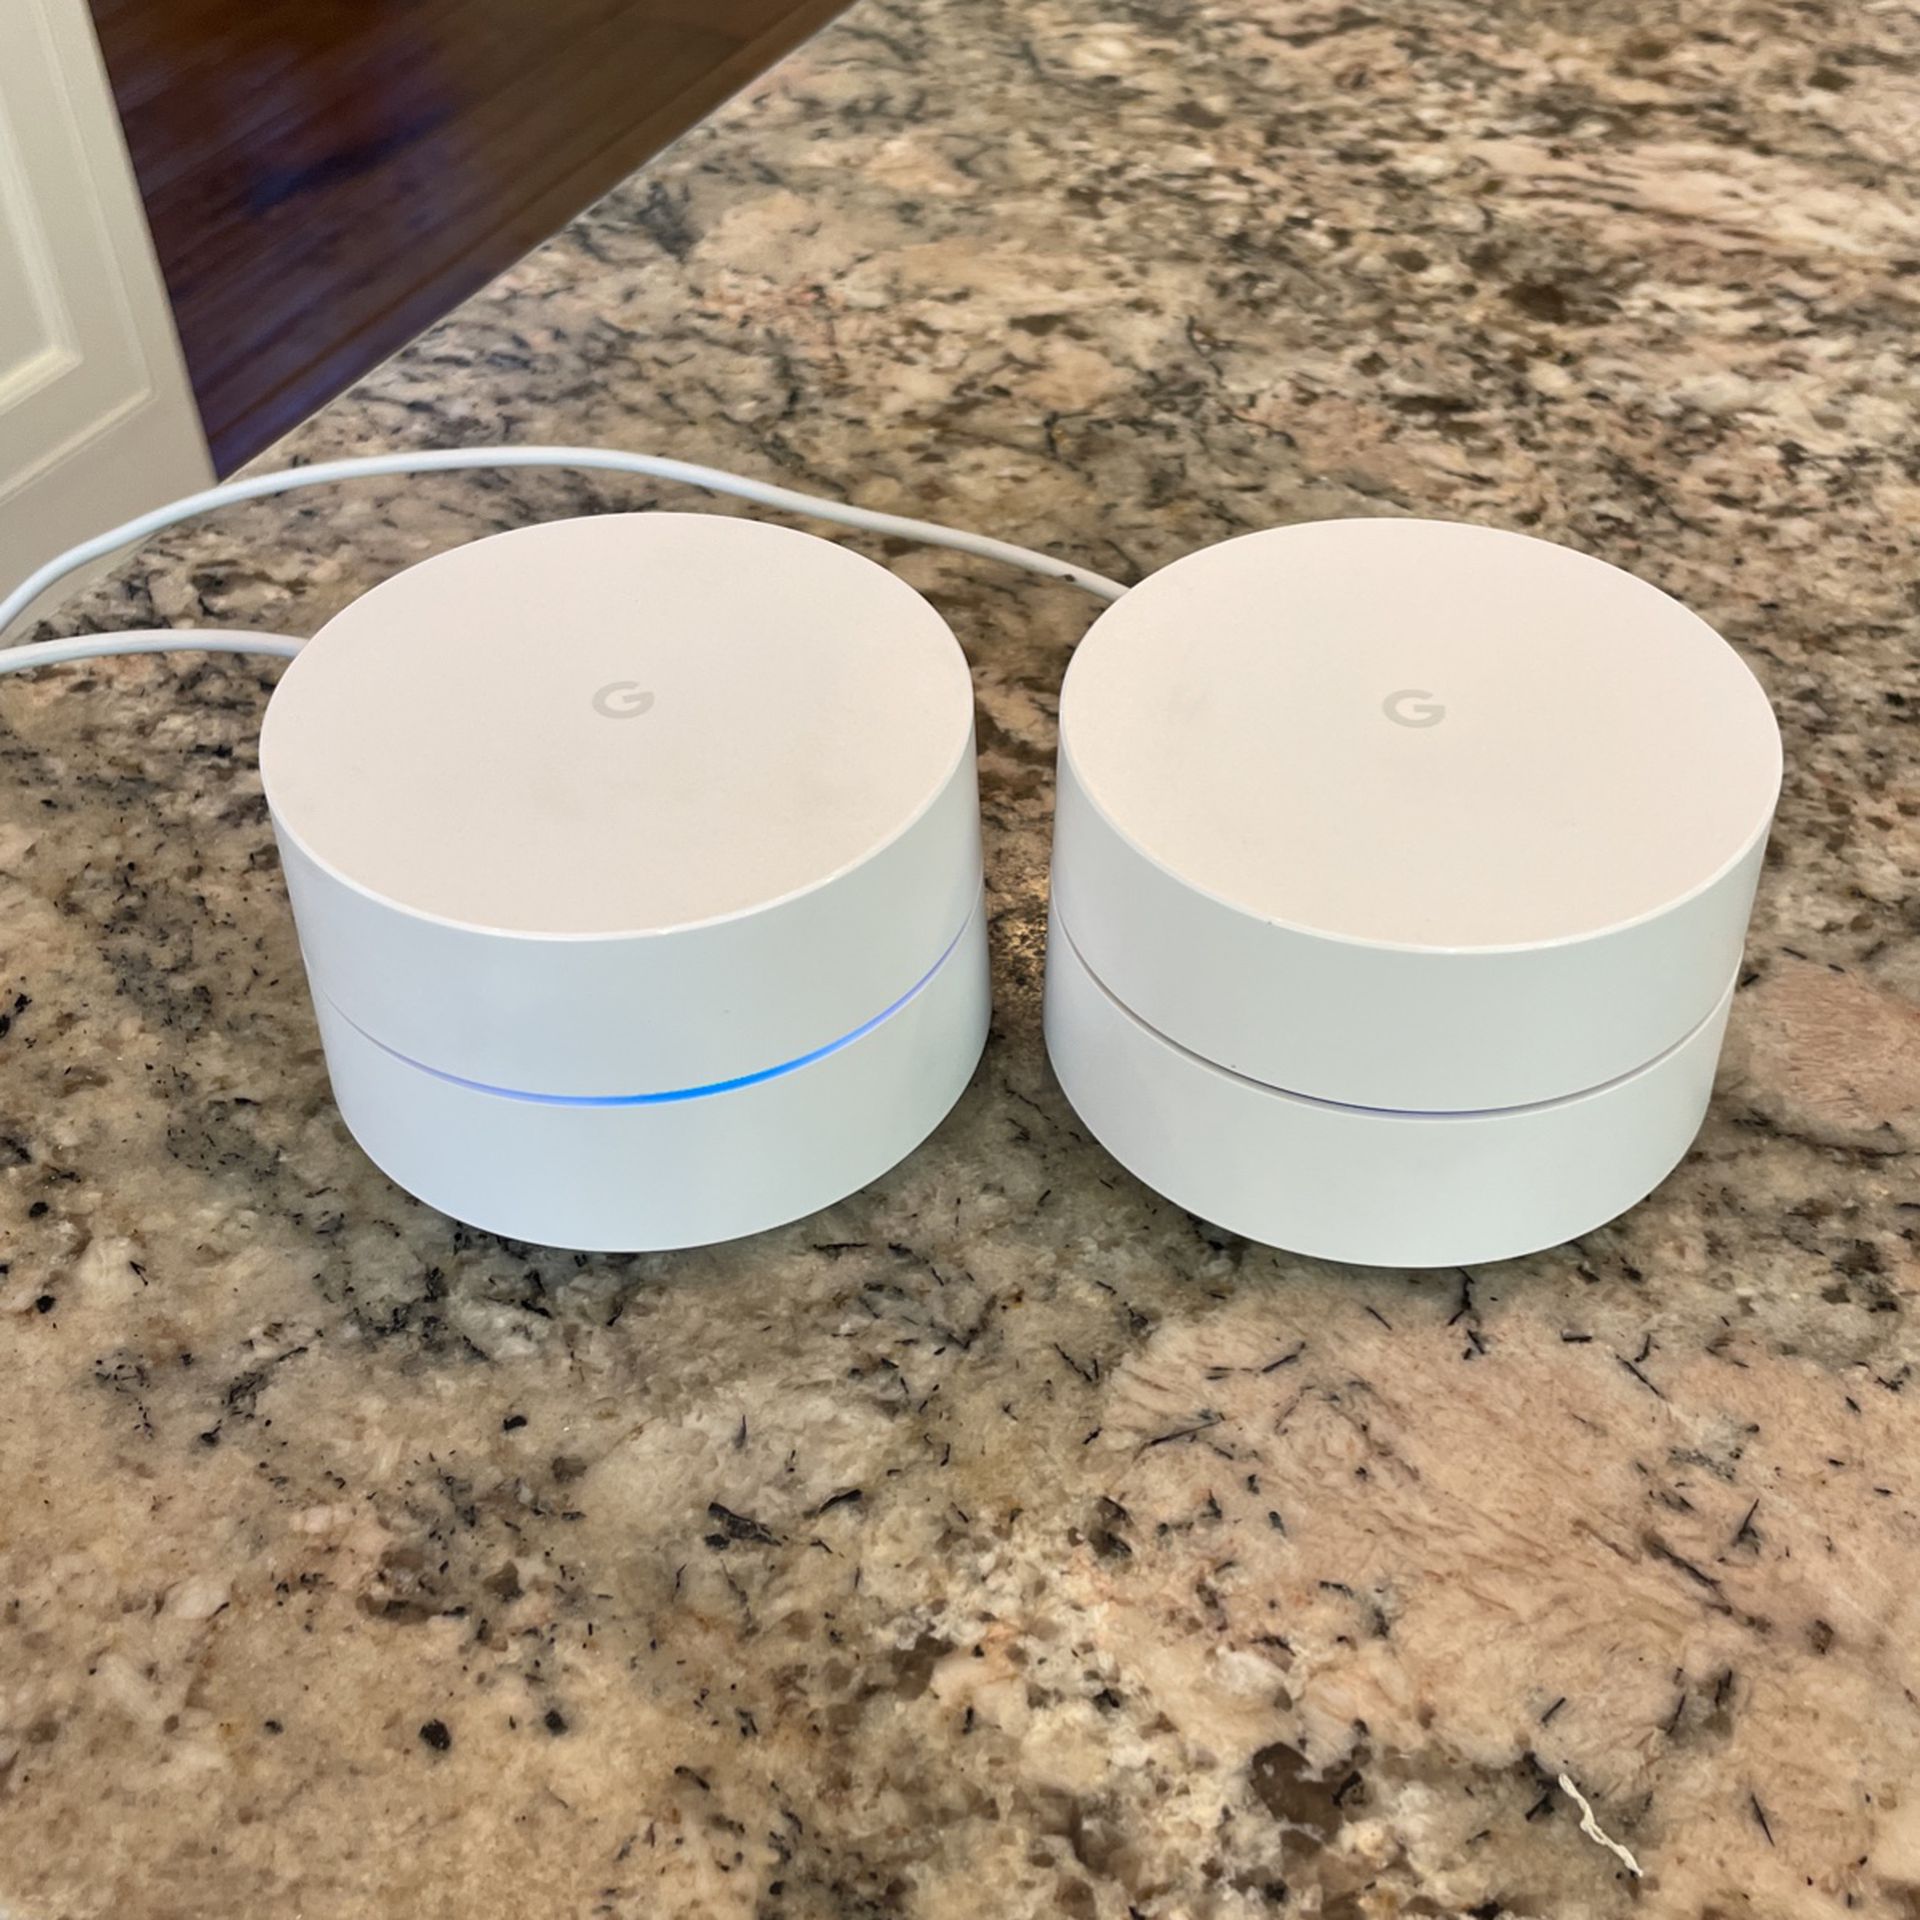 Google Wifi Point - 2 PACK